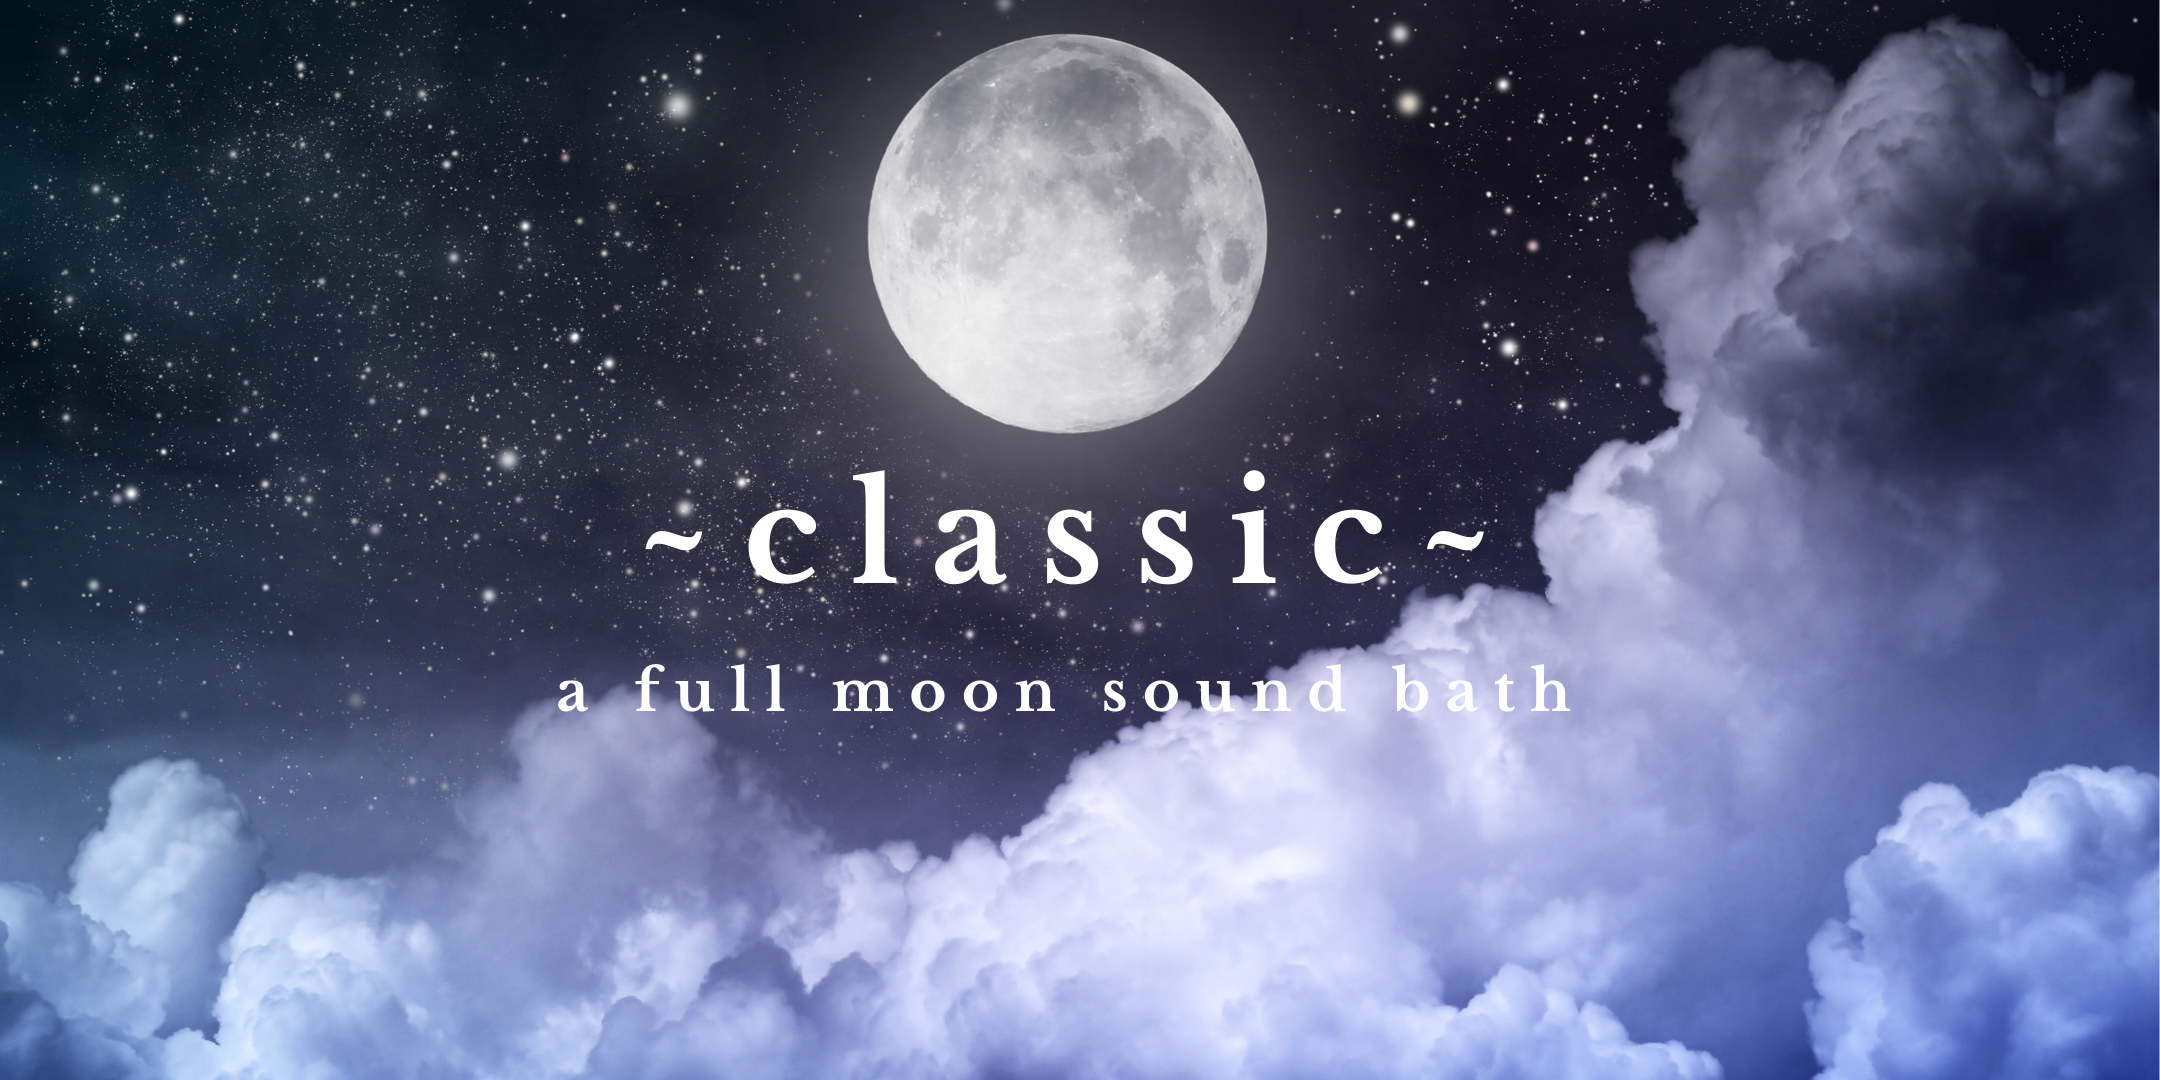 TENTATIVE: Full Moon Sound Bath | Sound Healing With Crystal Bowls and Gongs in Berkeley 